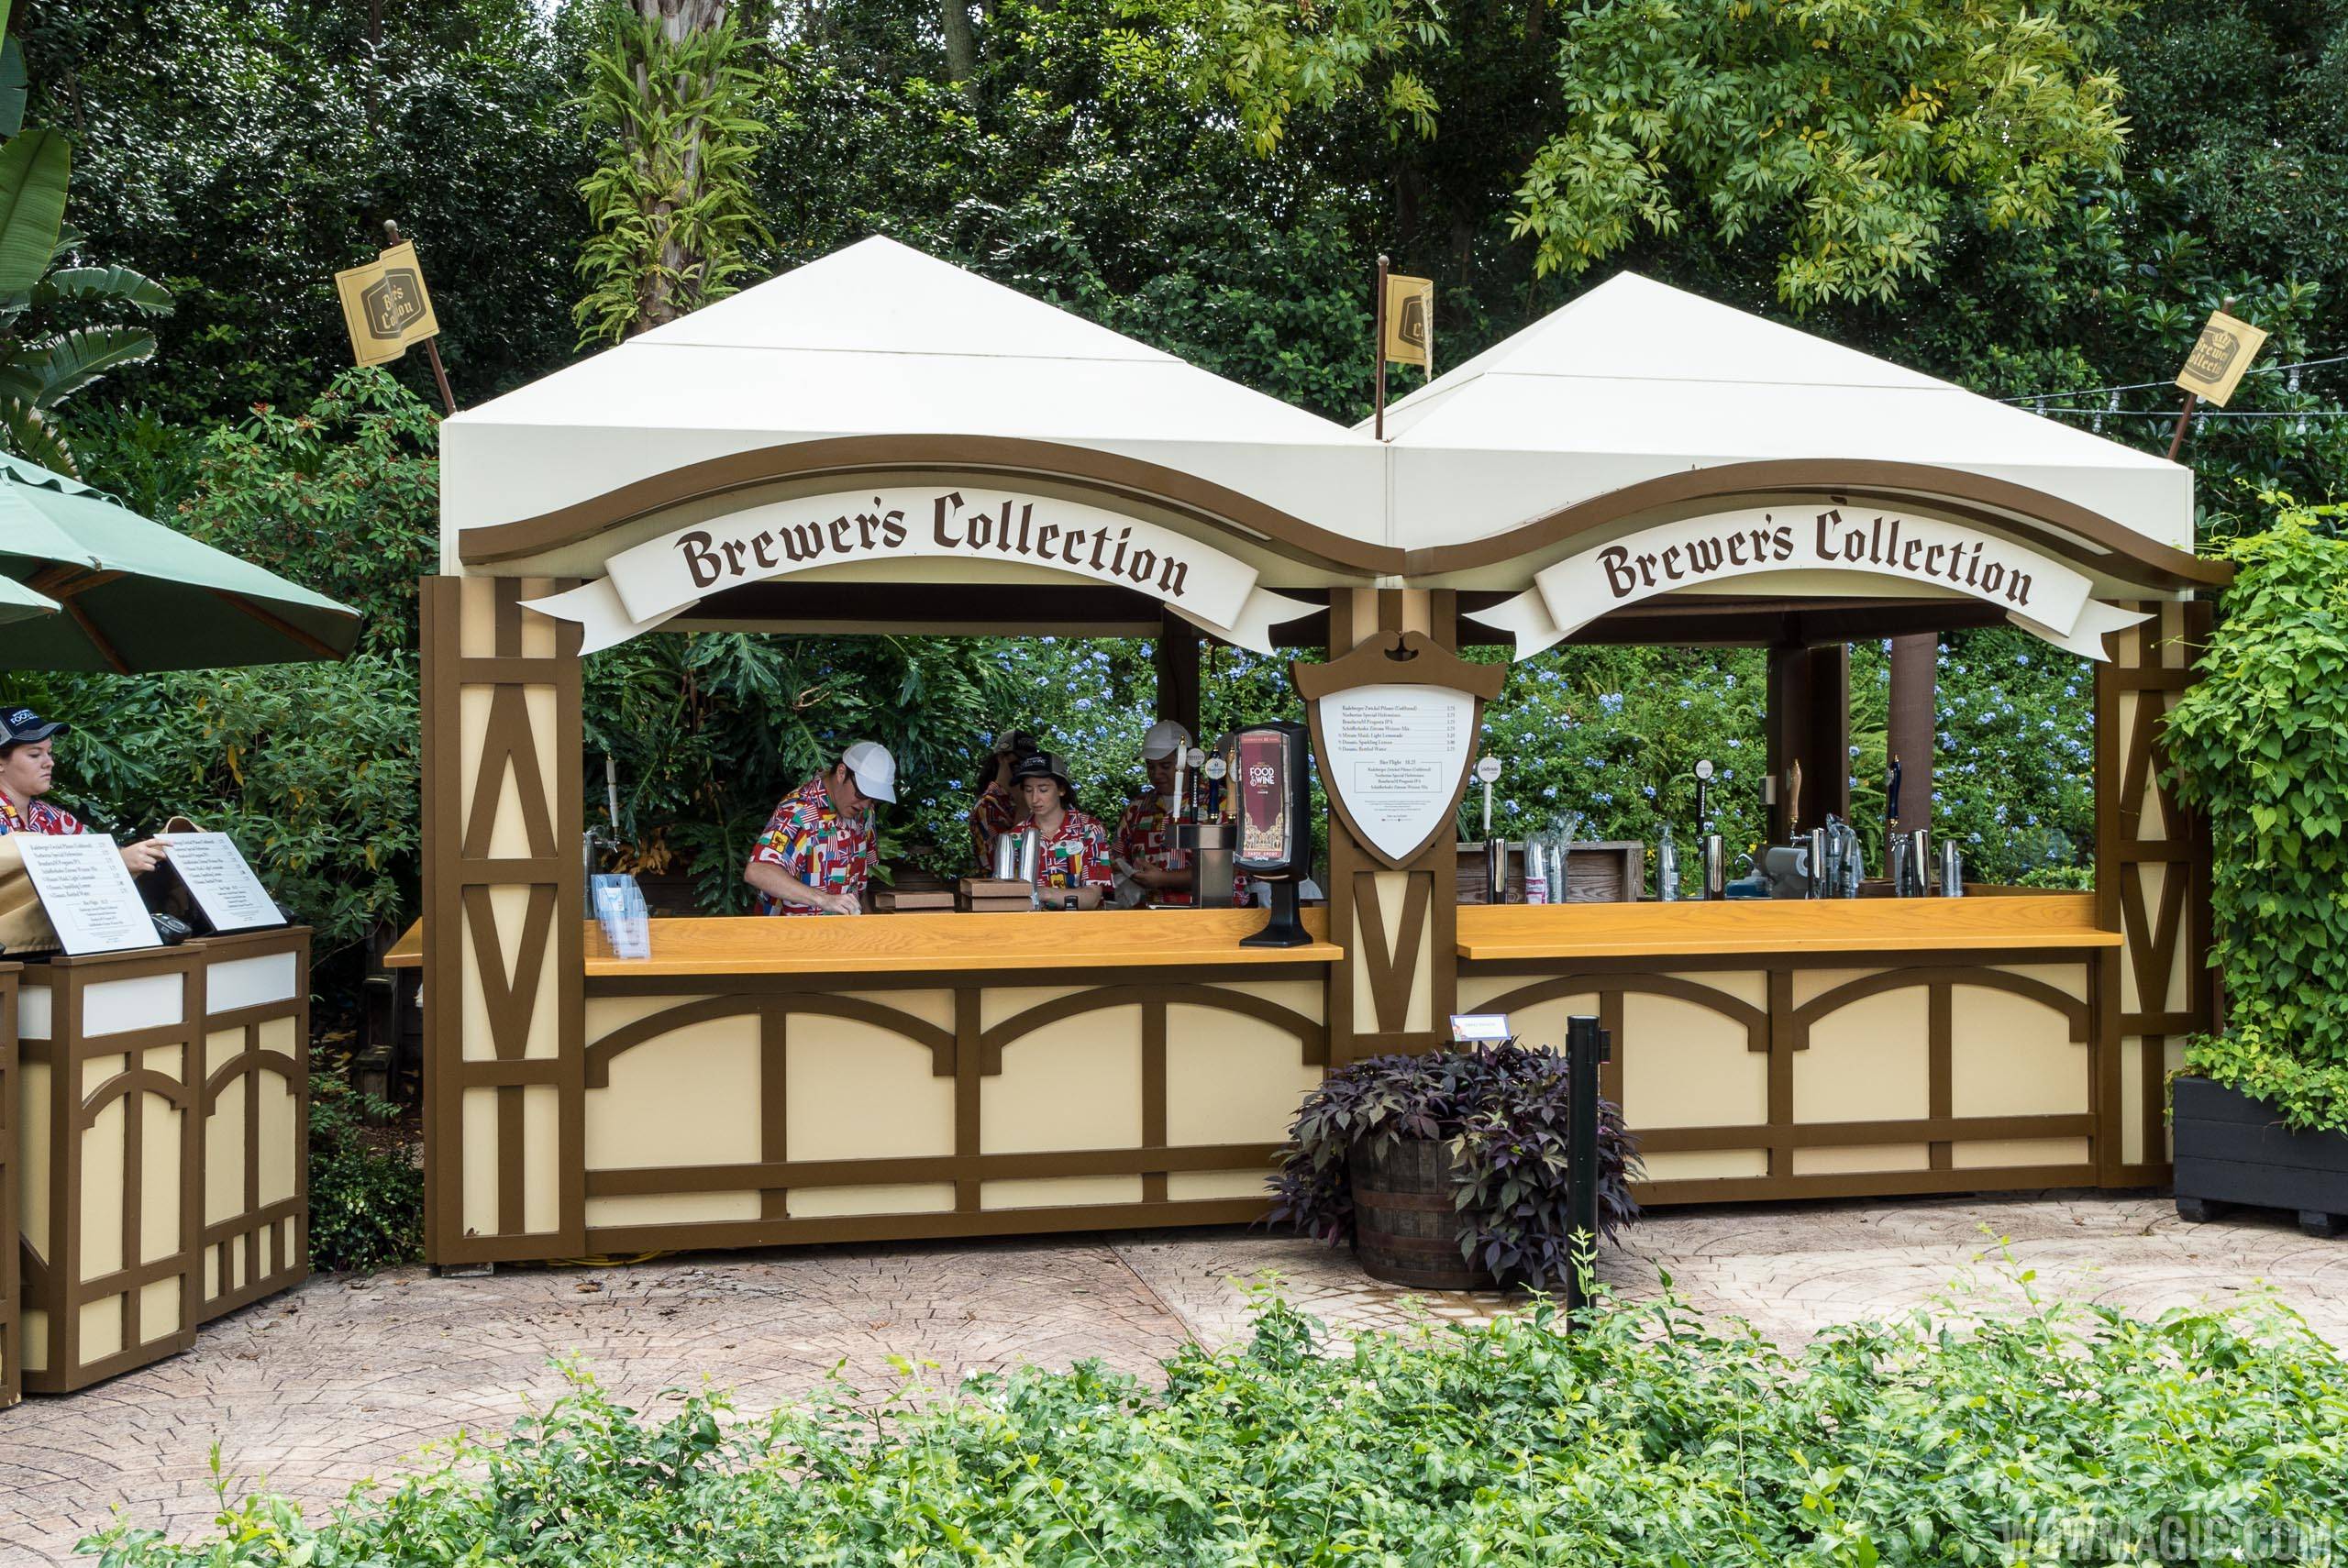 2015 Epcot Food and Wine Festival Marketplace kiosk - Brewer's Collection